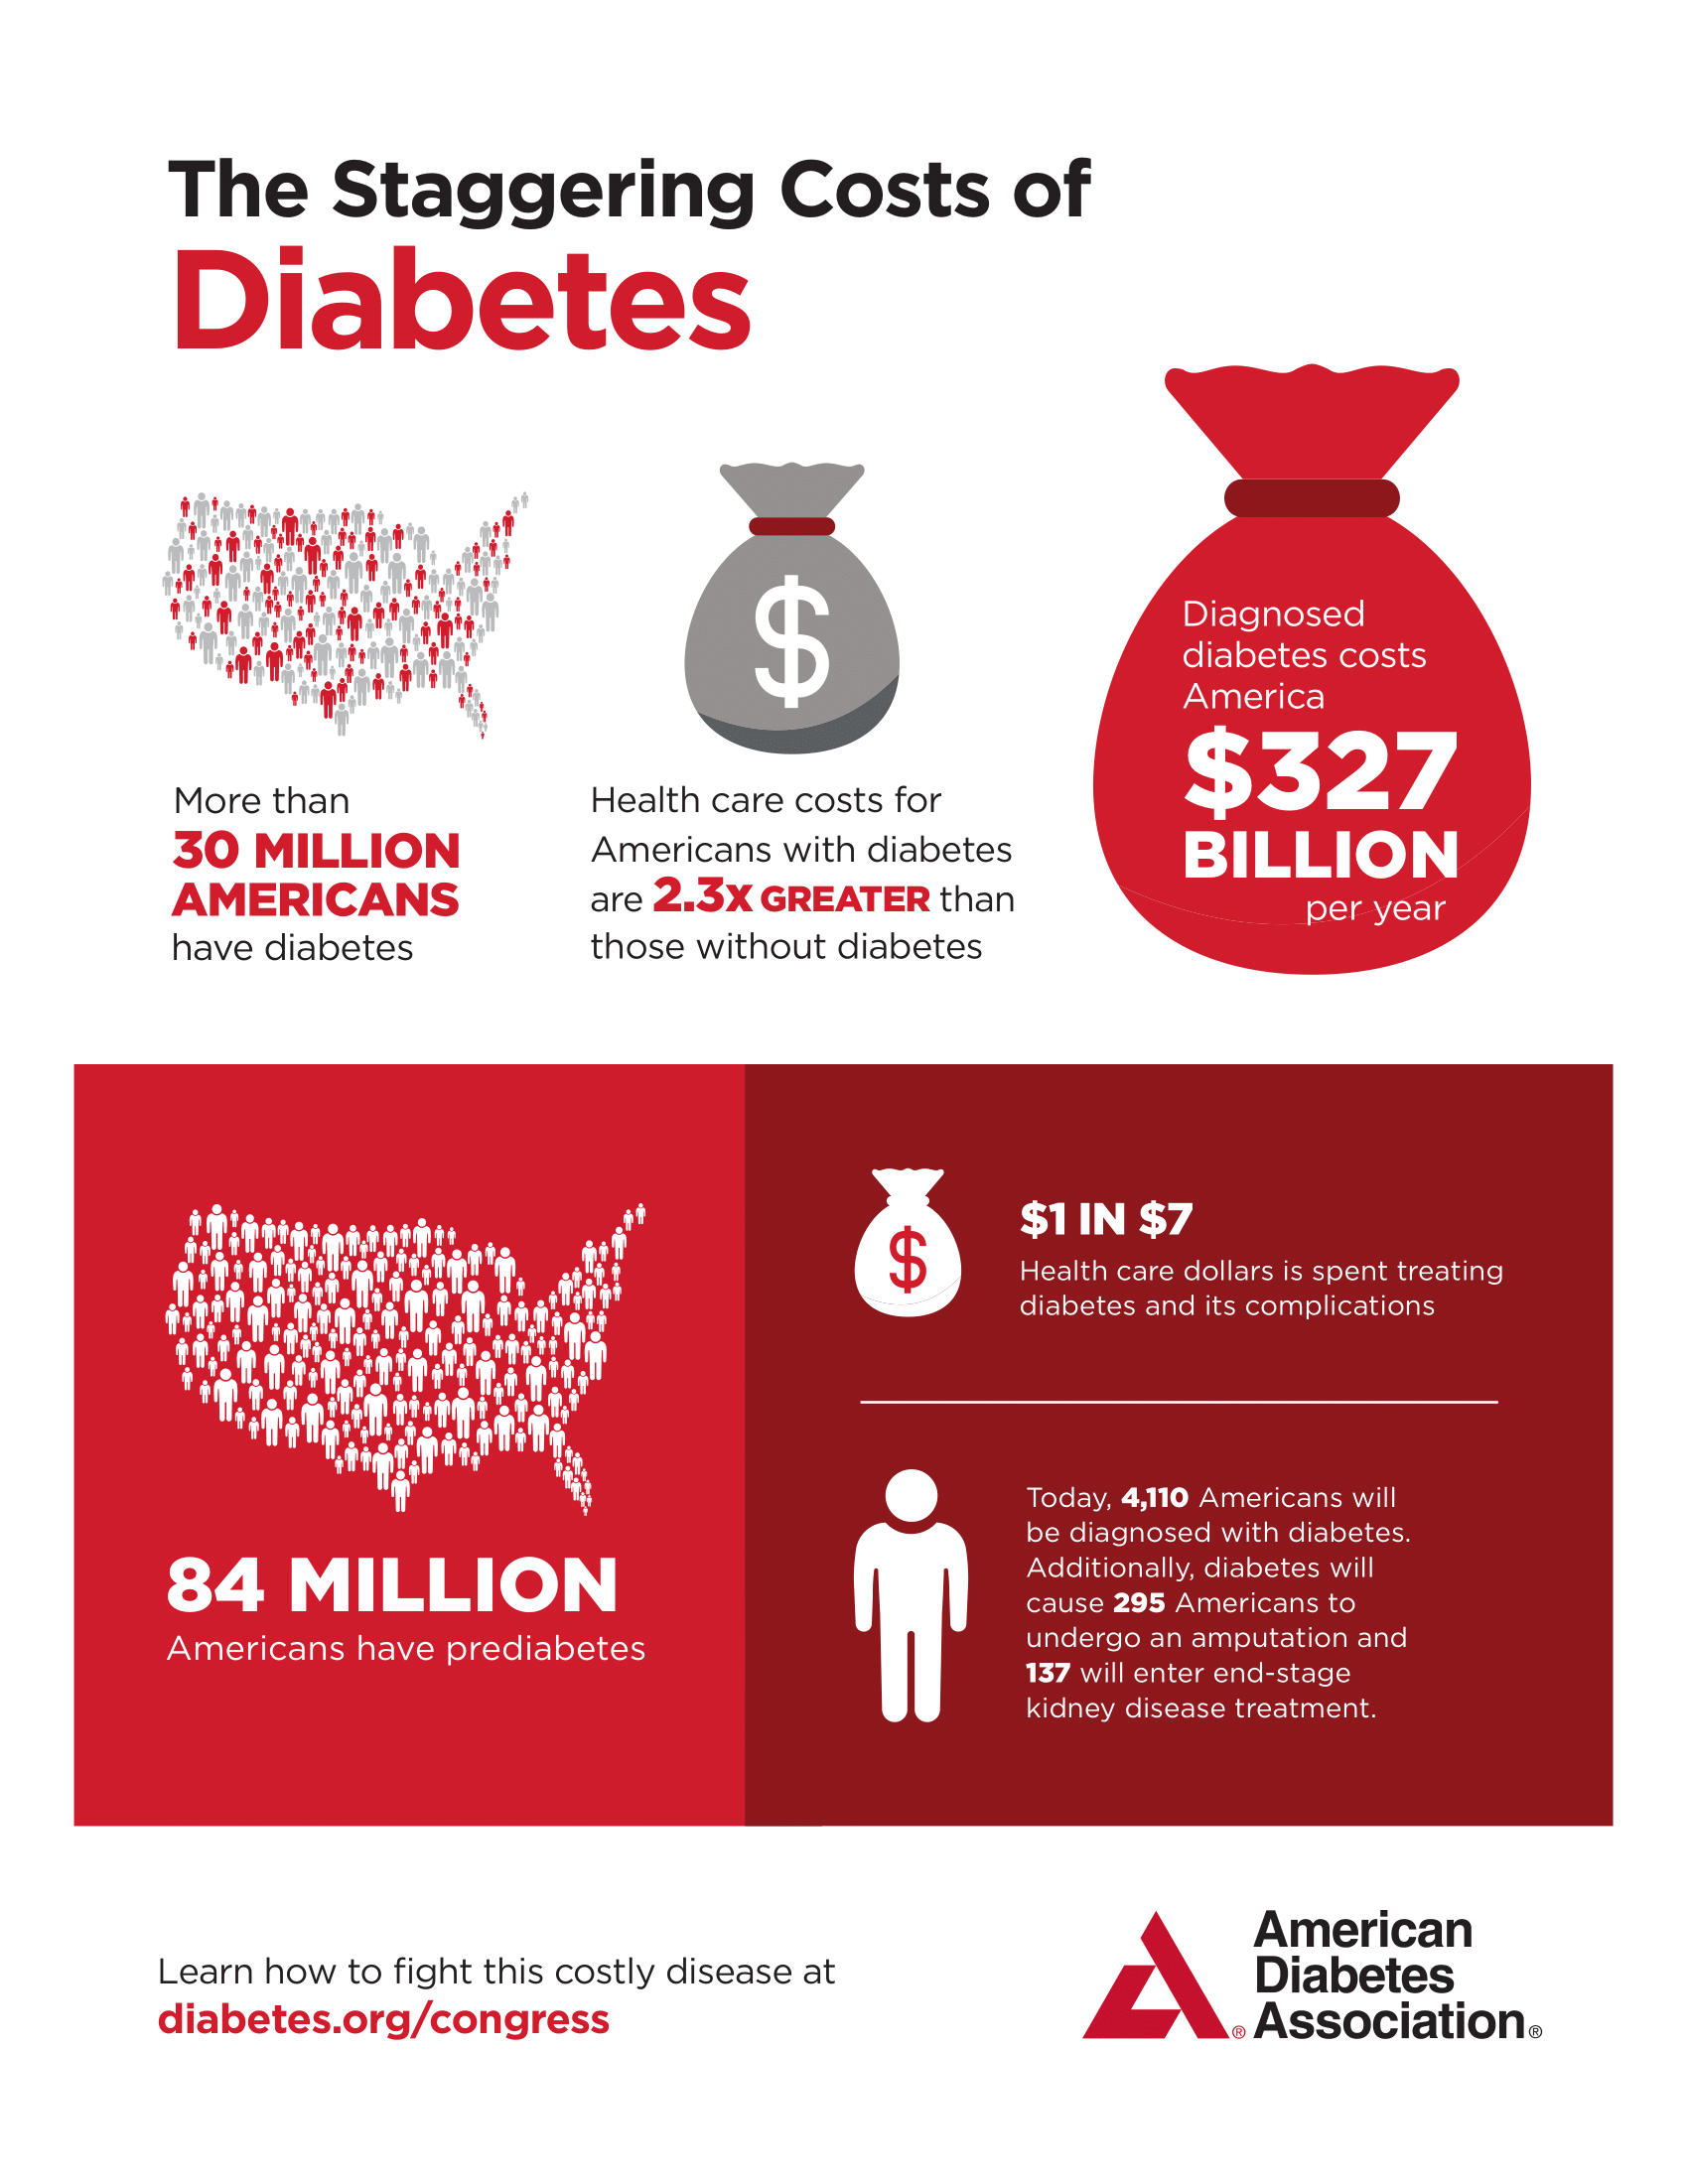 The Cost of Diabetes